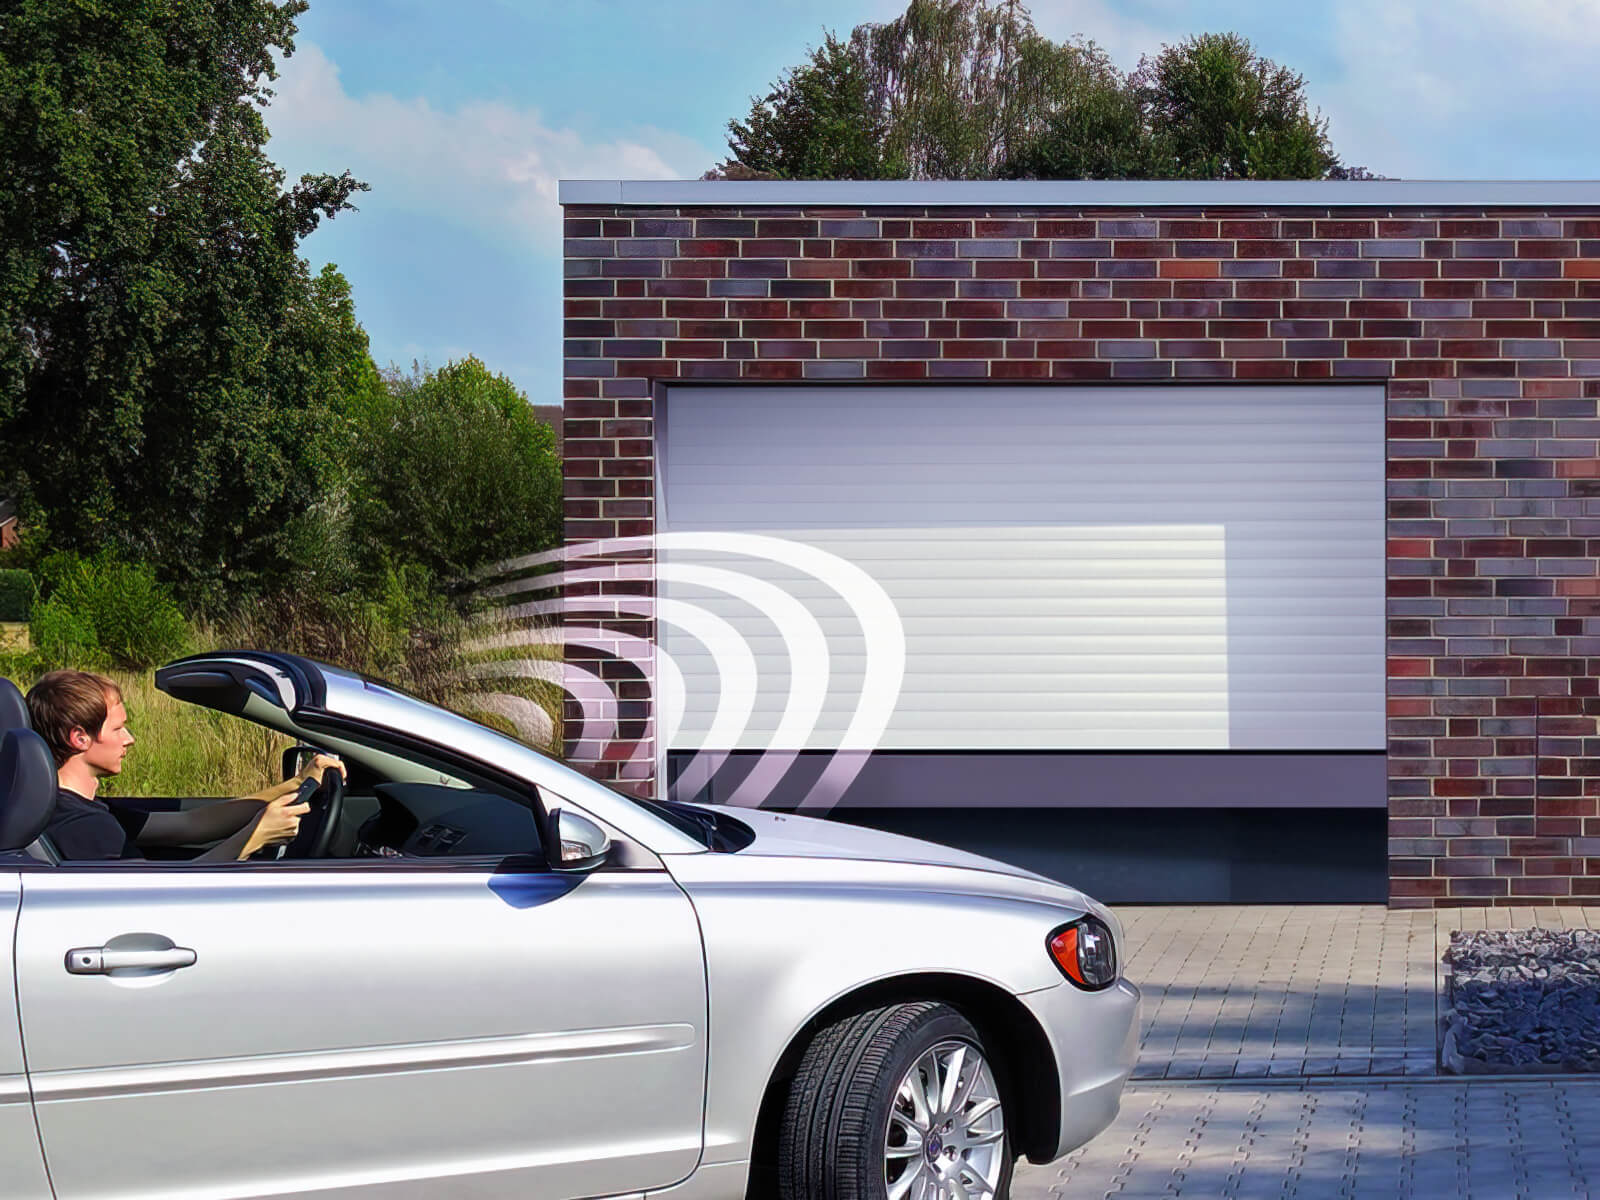 Professional Chudleigh Electric Garage Door Automation company